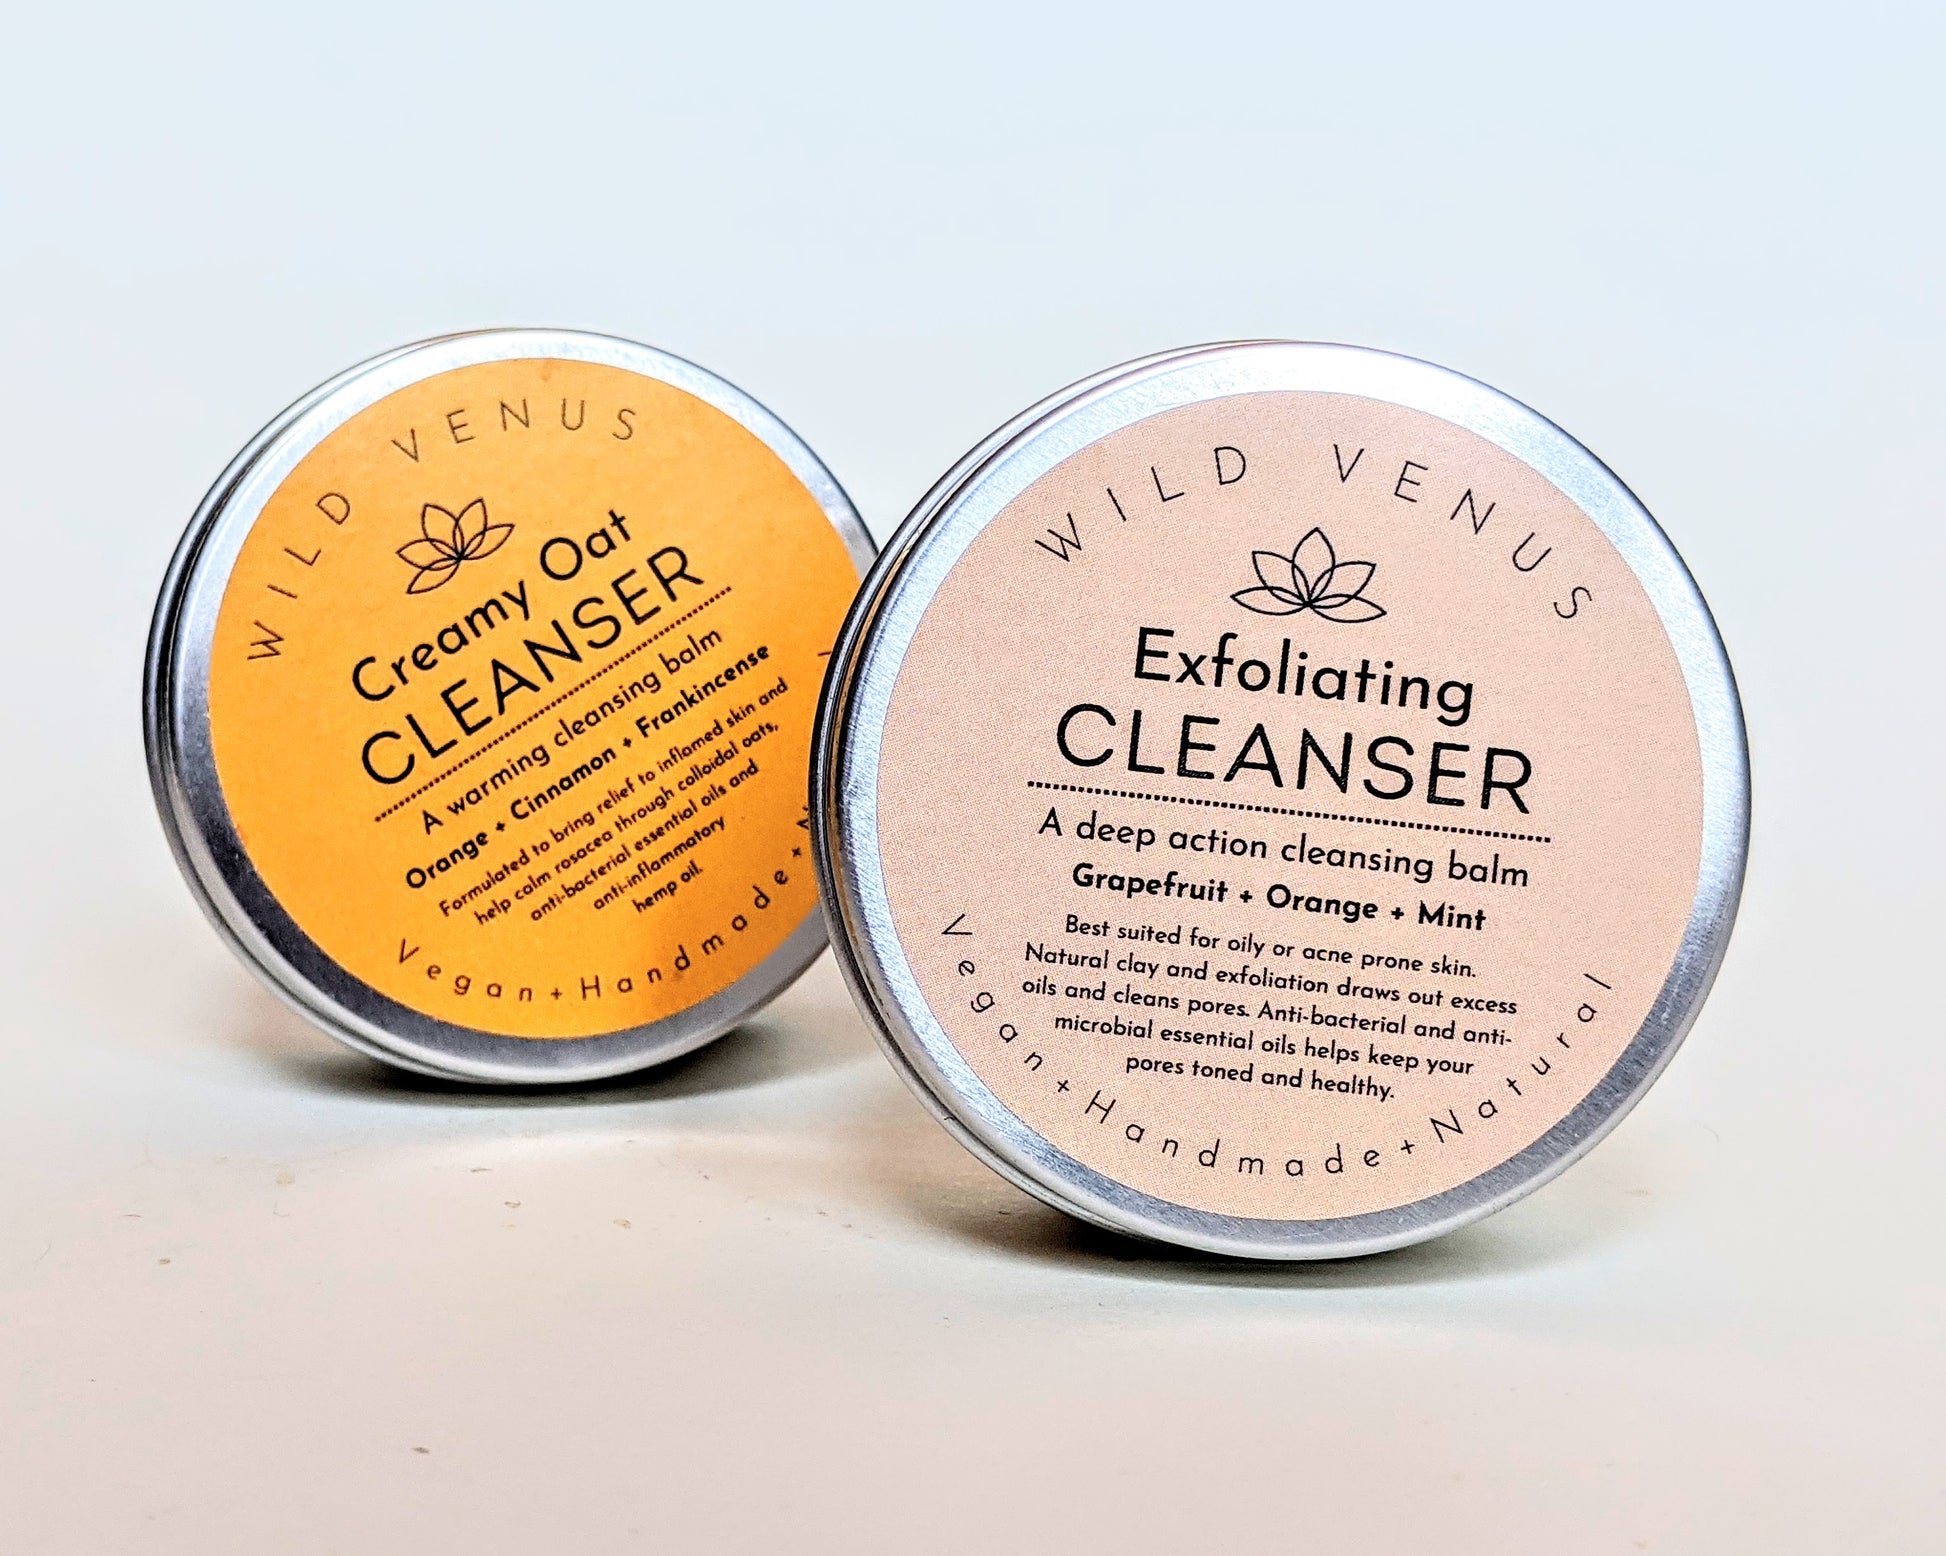 An exfoliating cleansing balm in front of a creamy oat cleanser balm.